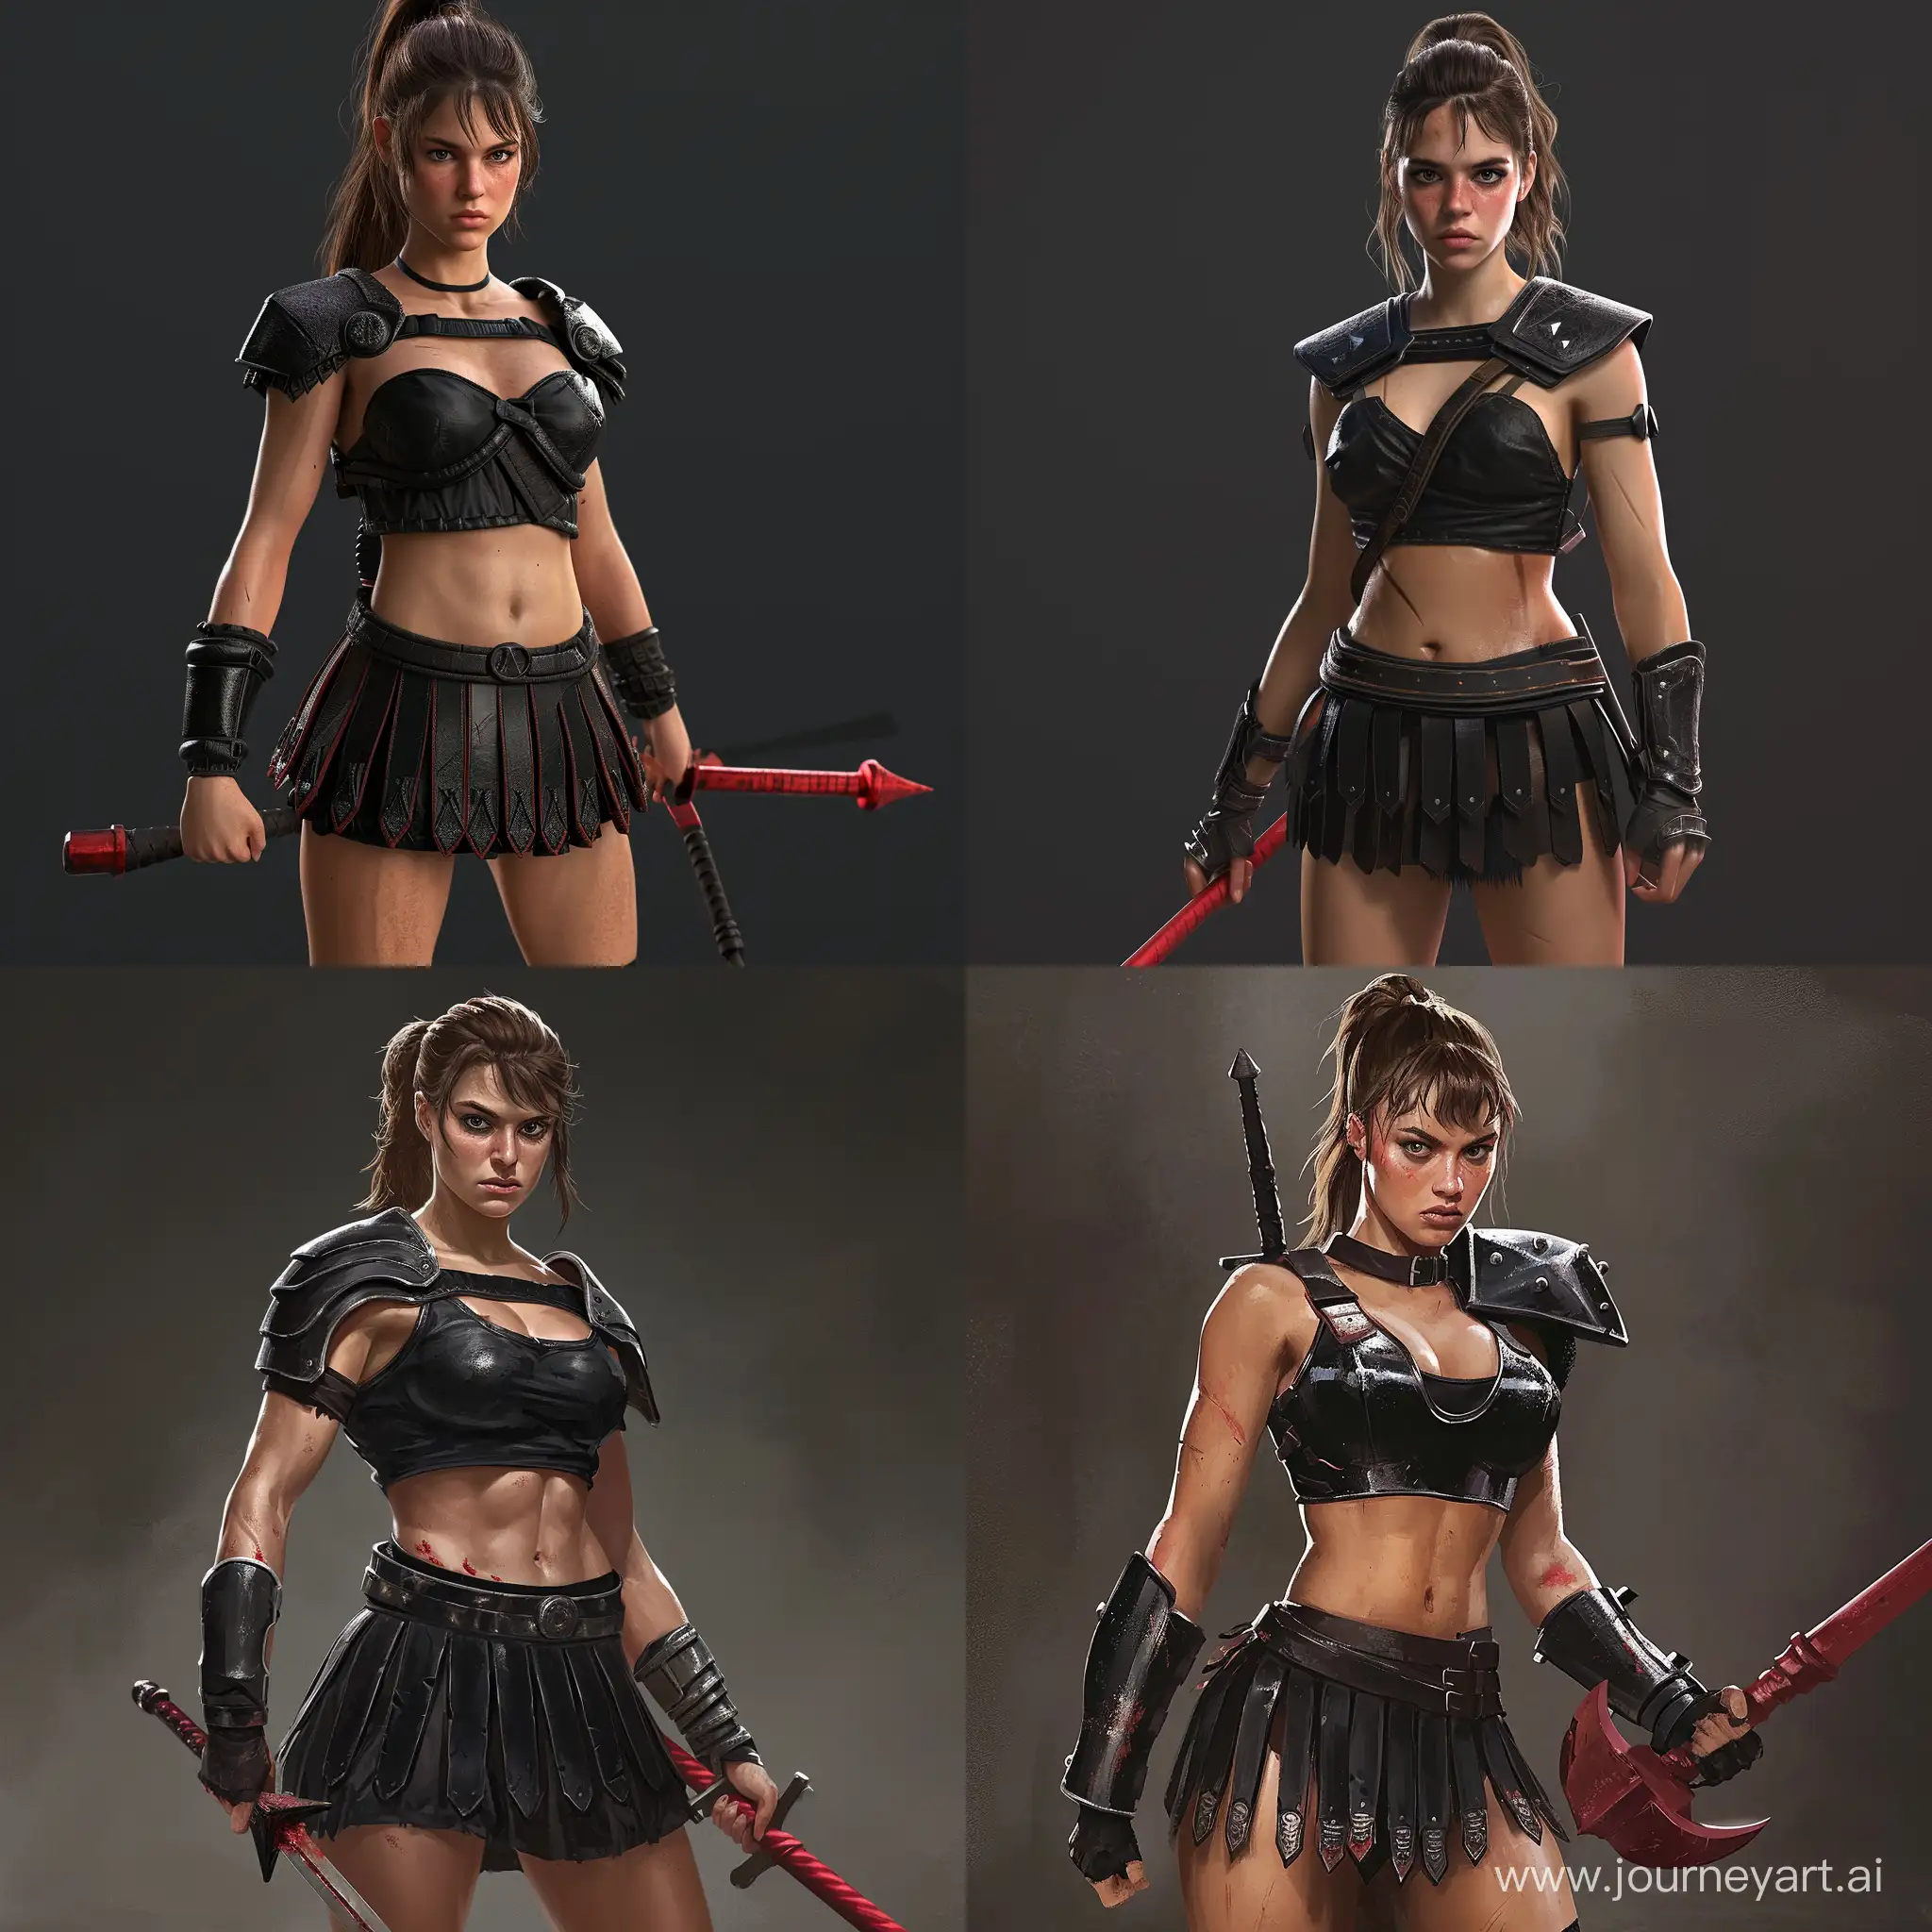 A gladiator princess, wearing black shoulderplates, a black short chestplate exposing her stomach, and a black plate skirt above knee length. She has brown hair in a ponytail of medium length, fierce expression, lightly tanned skin. She is wielding a red steel flail